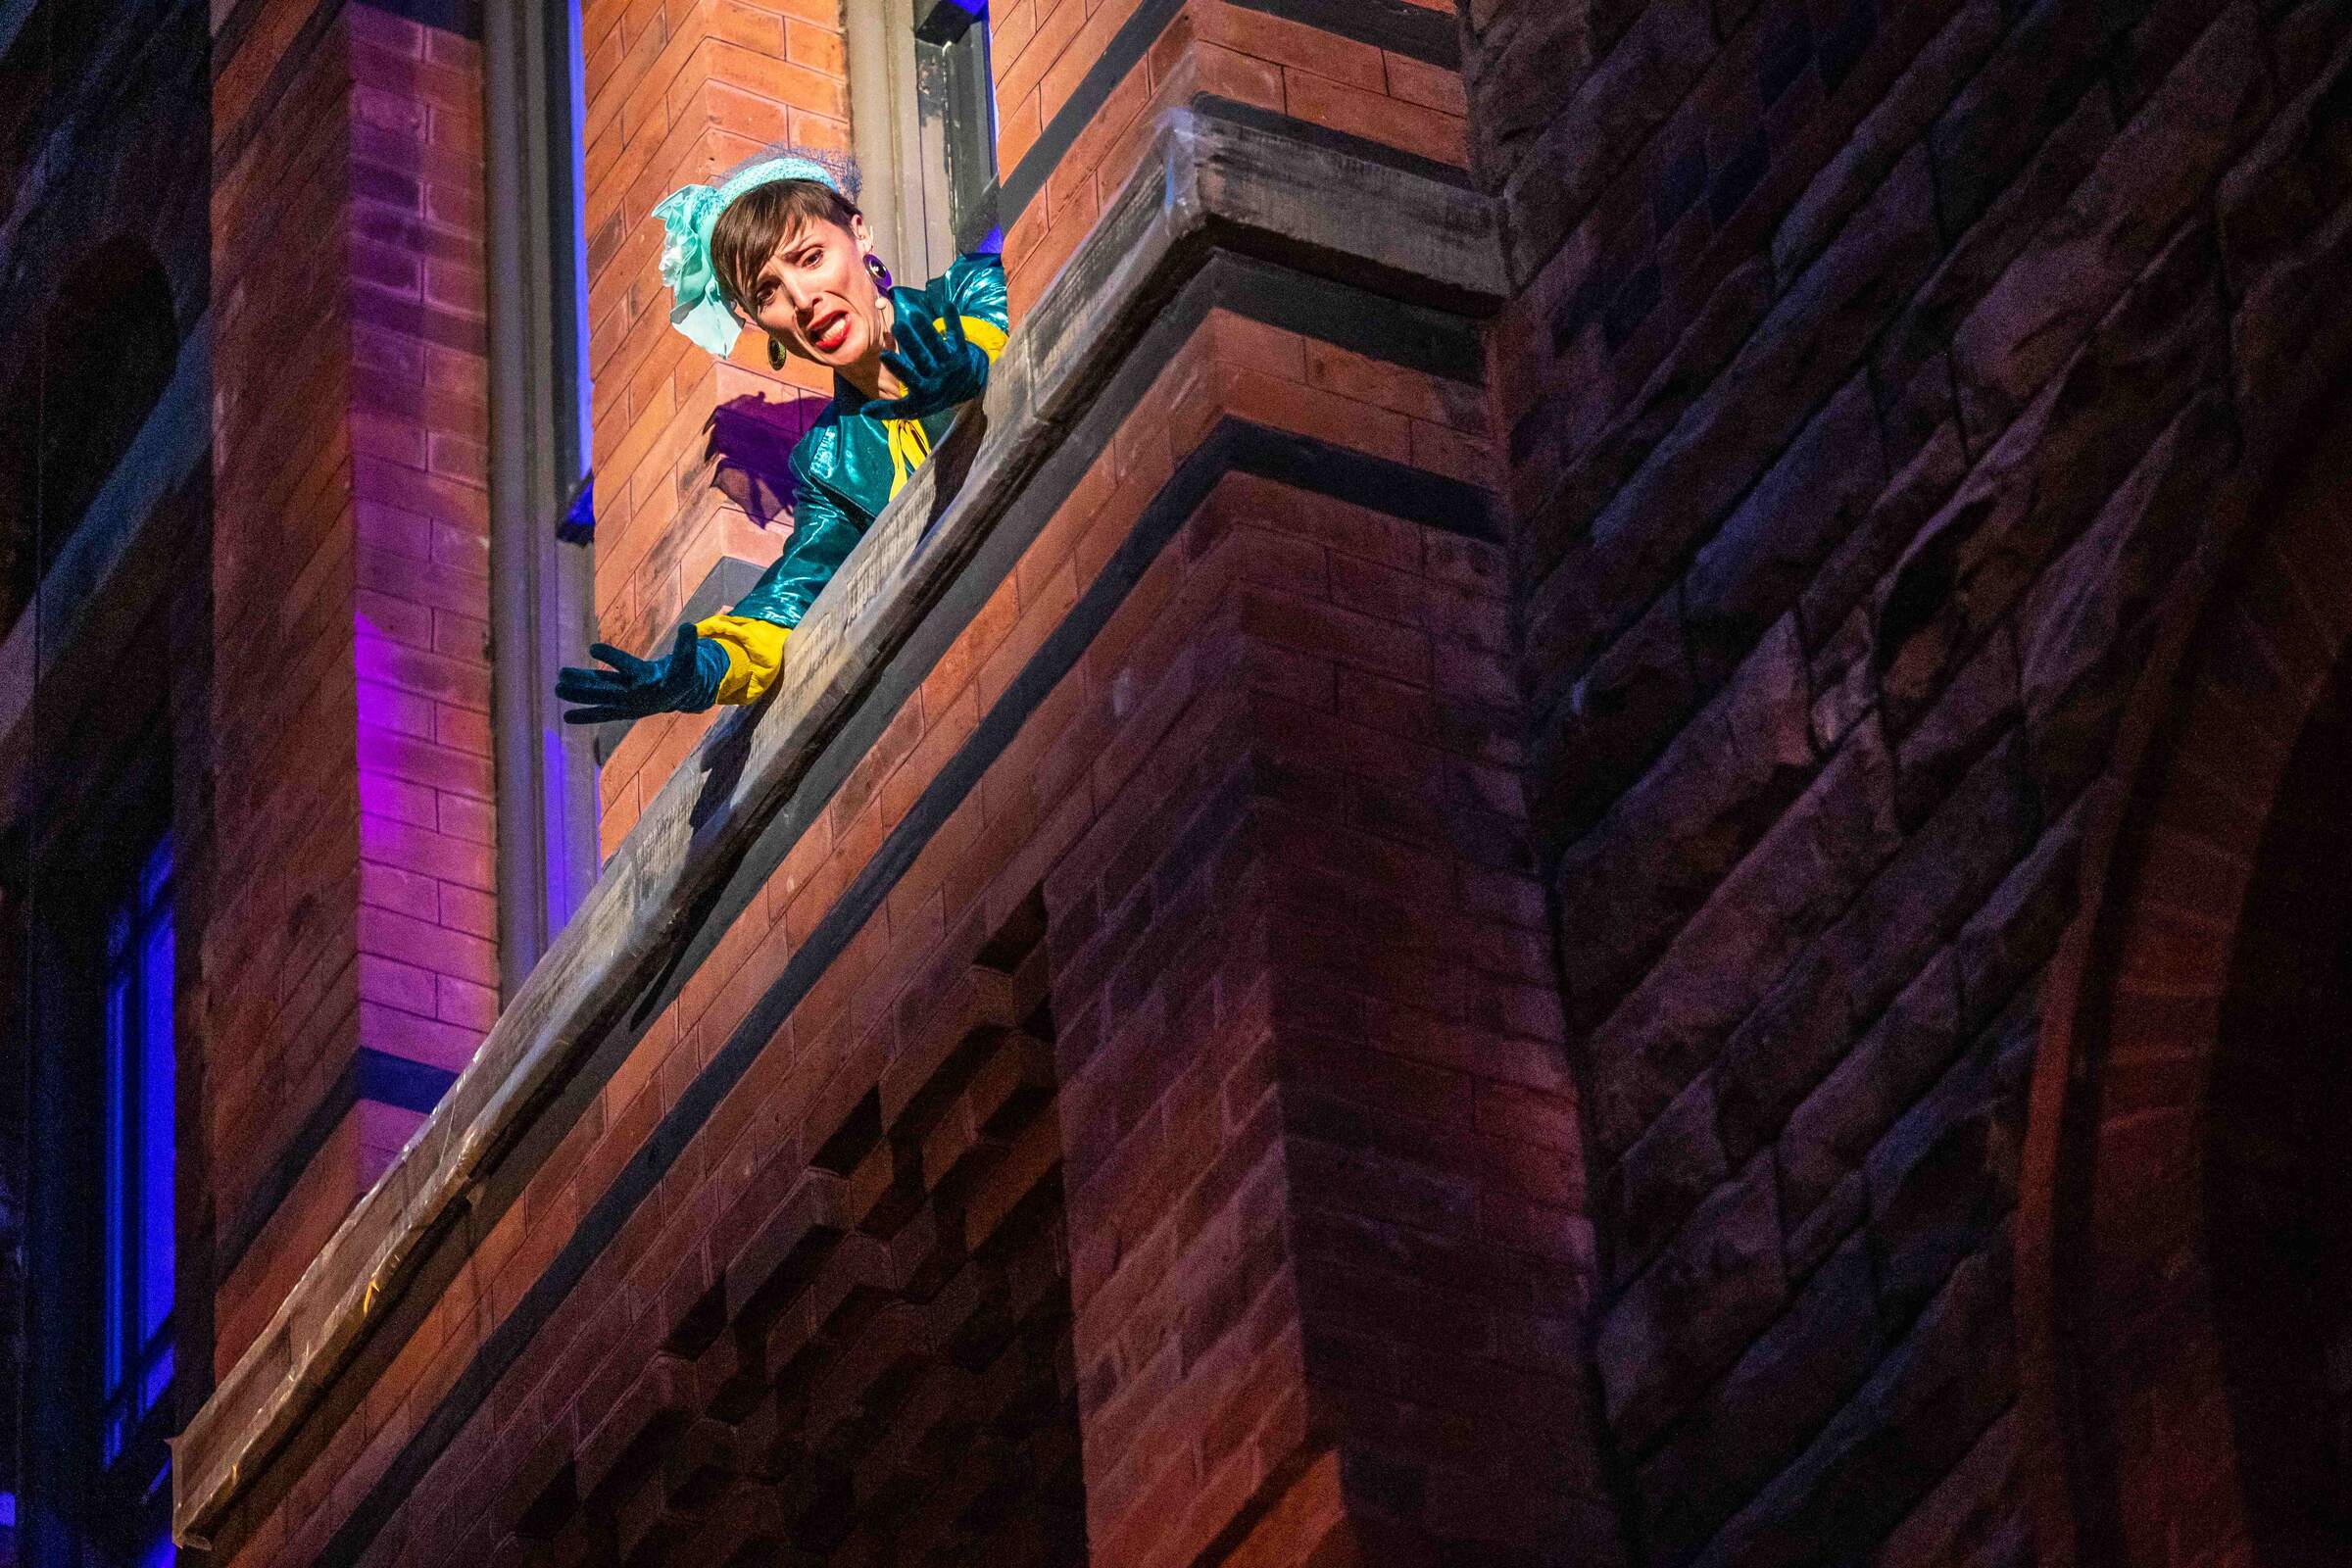 A woman wearing a bright teal outfit leans out of a window in a brick wall.